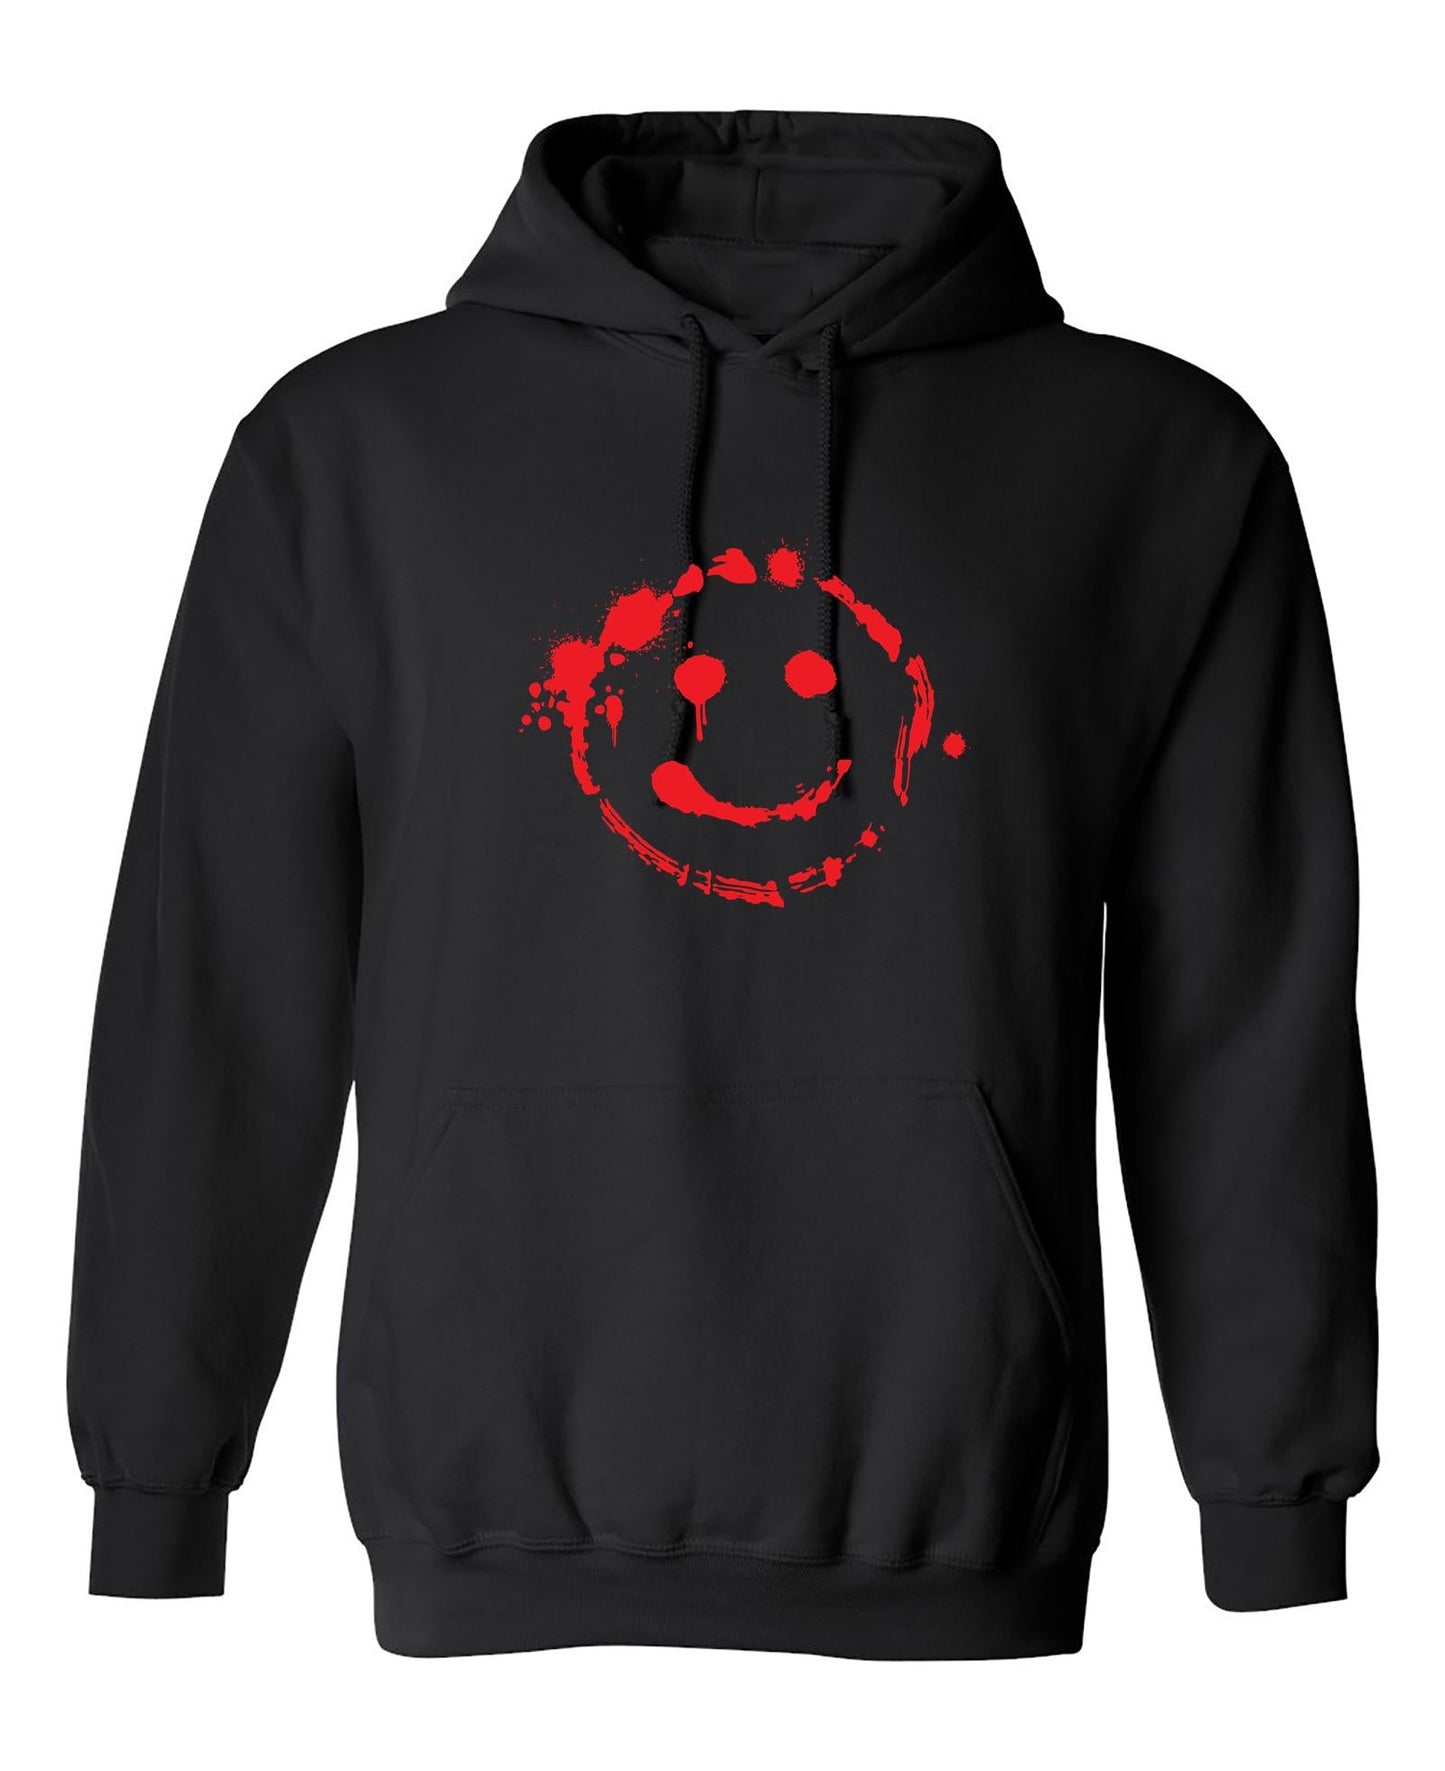 Funny T-Shirts design "Blooky Smile Tee"